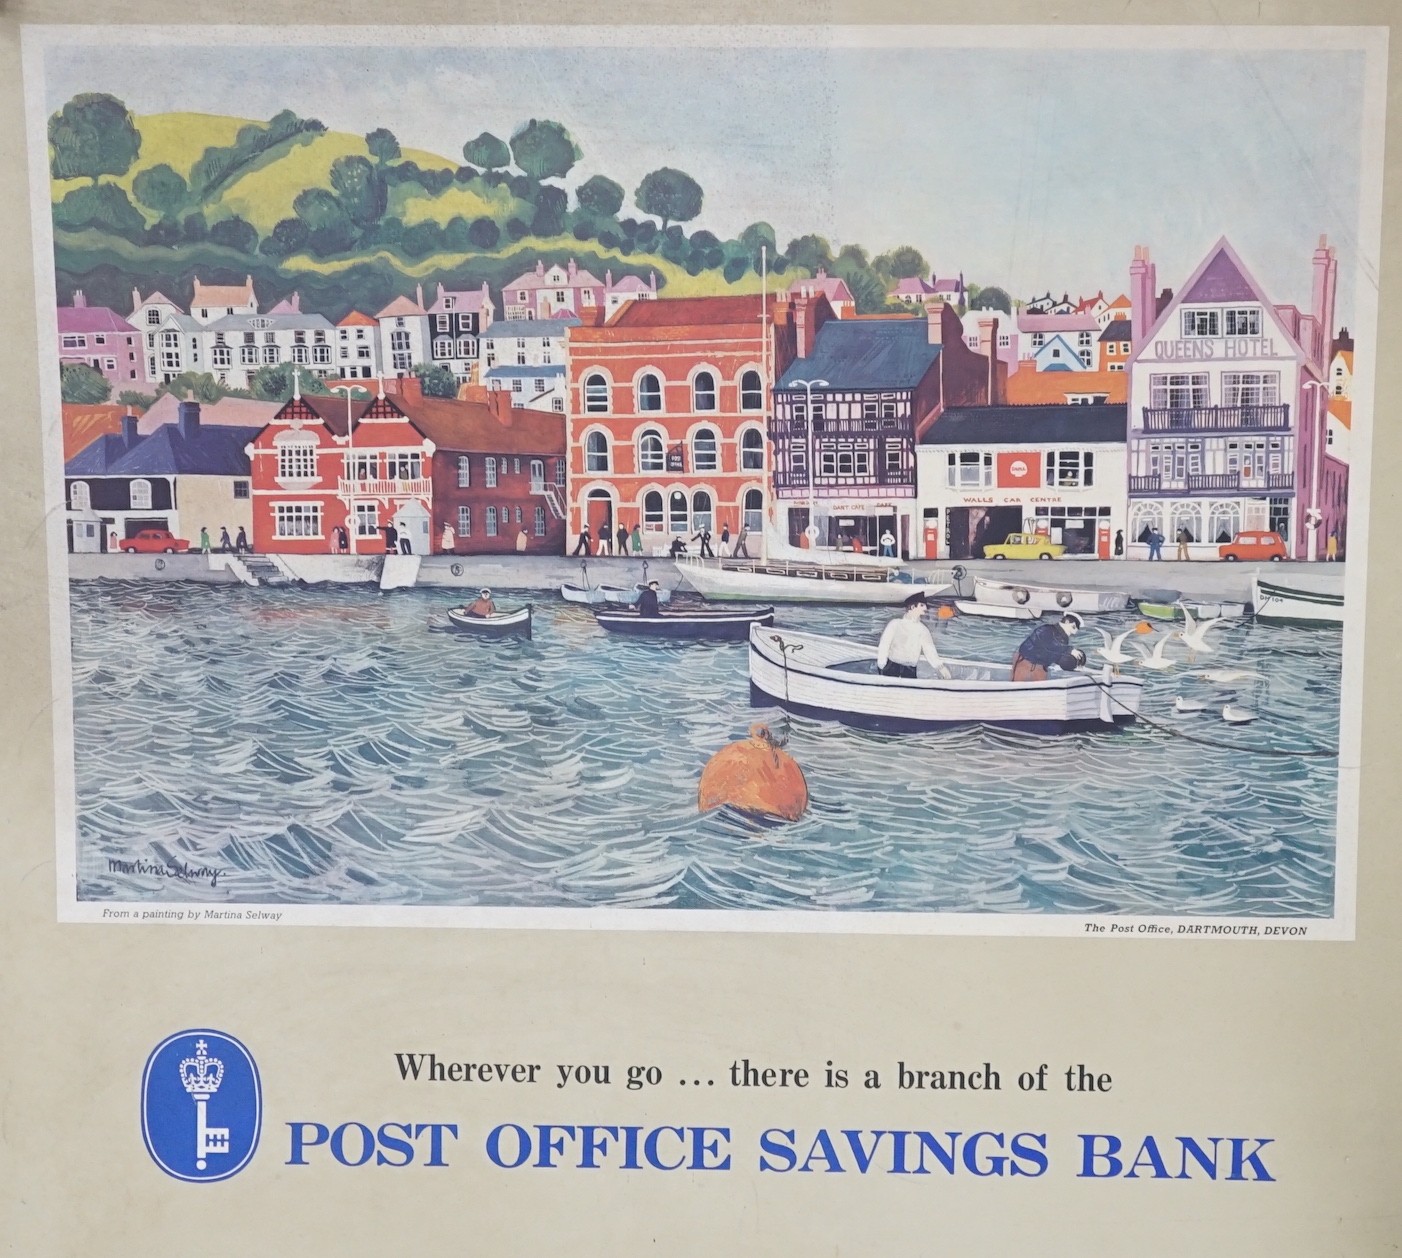 Martina Selway, lithograph, poster for 'The Post Office, Dartmouth, Devon', laid on board, 89 x 100cm, unframed